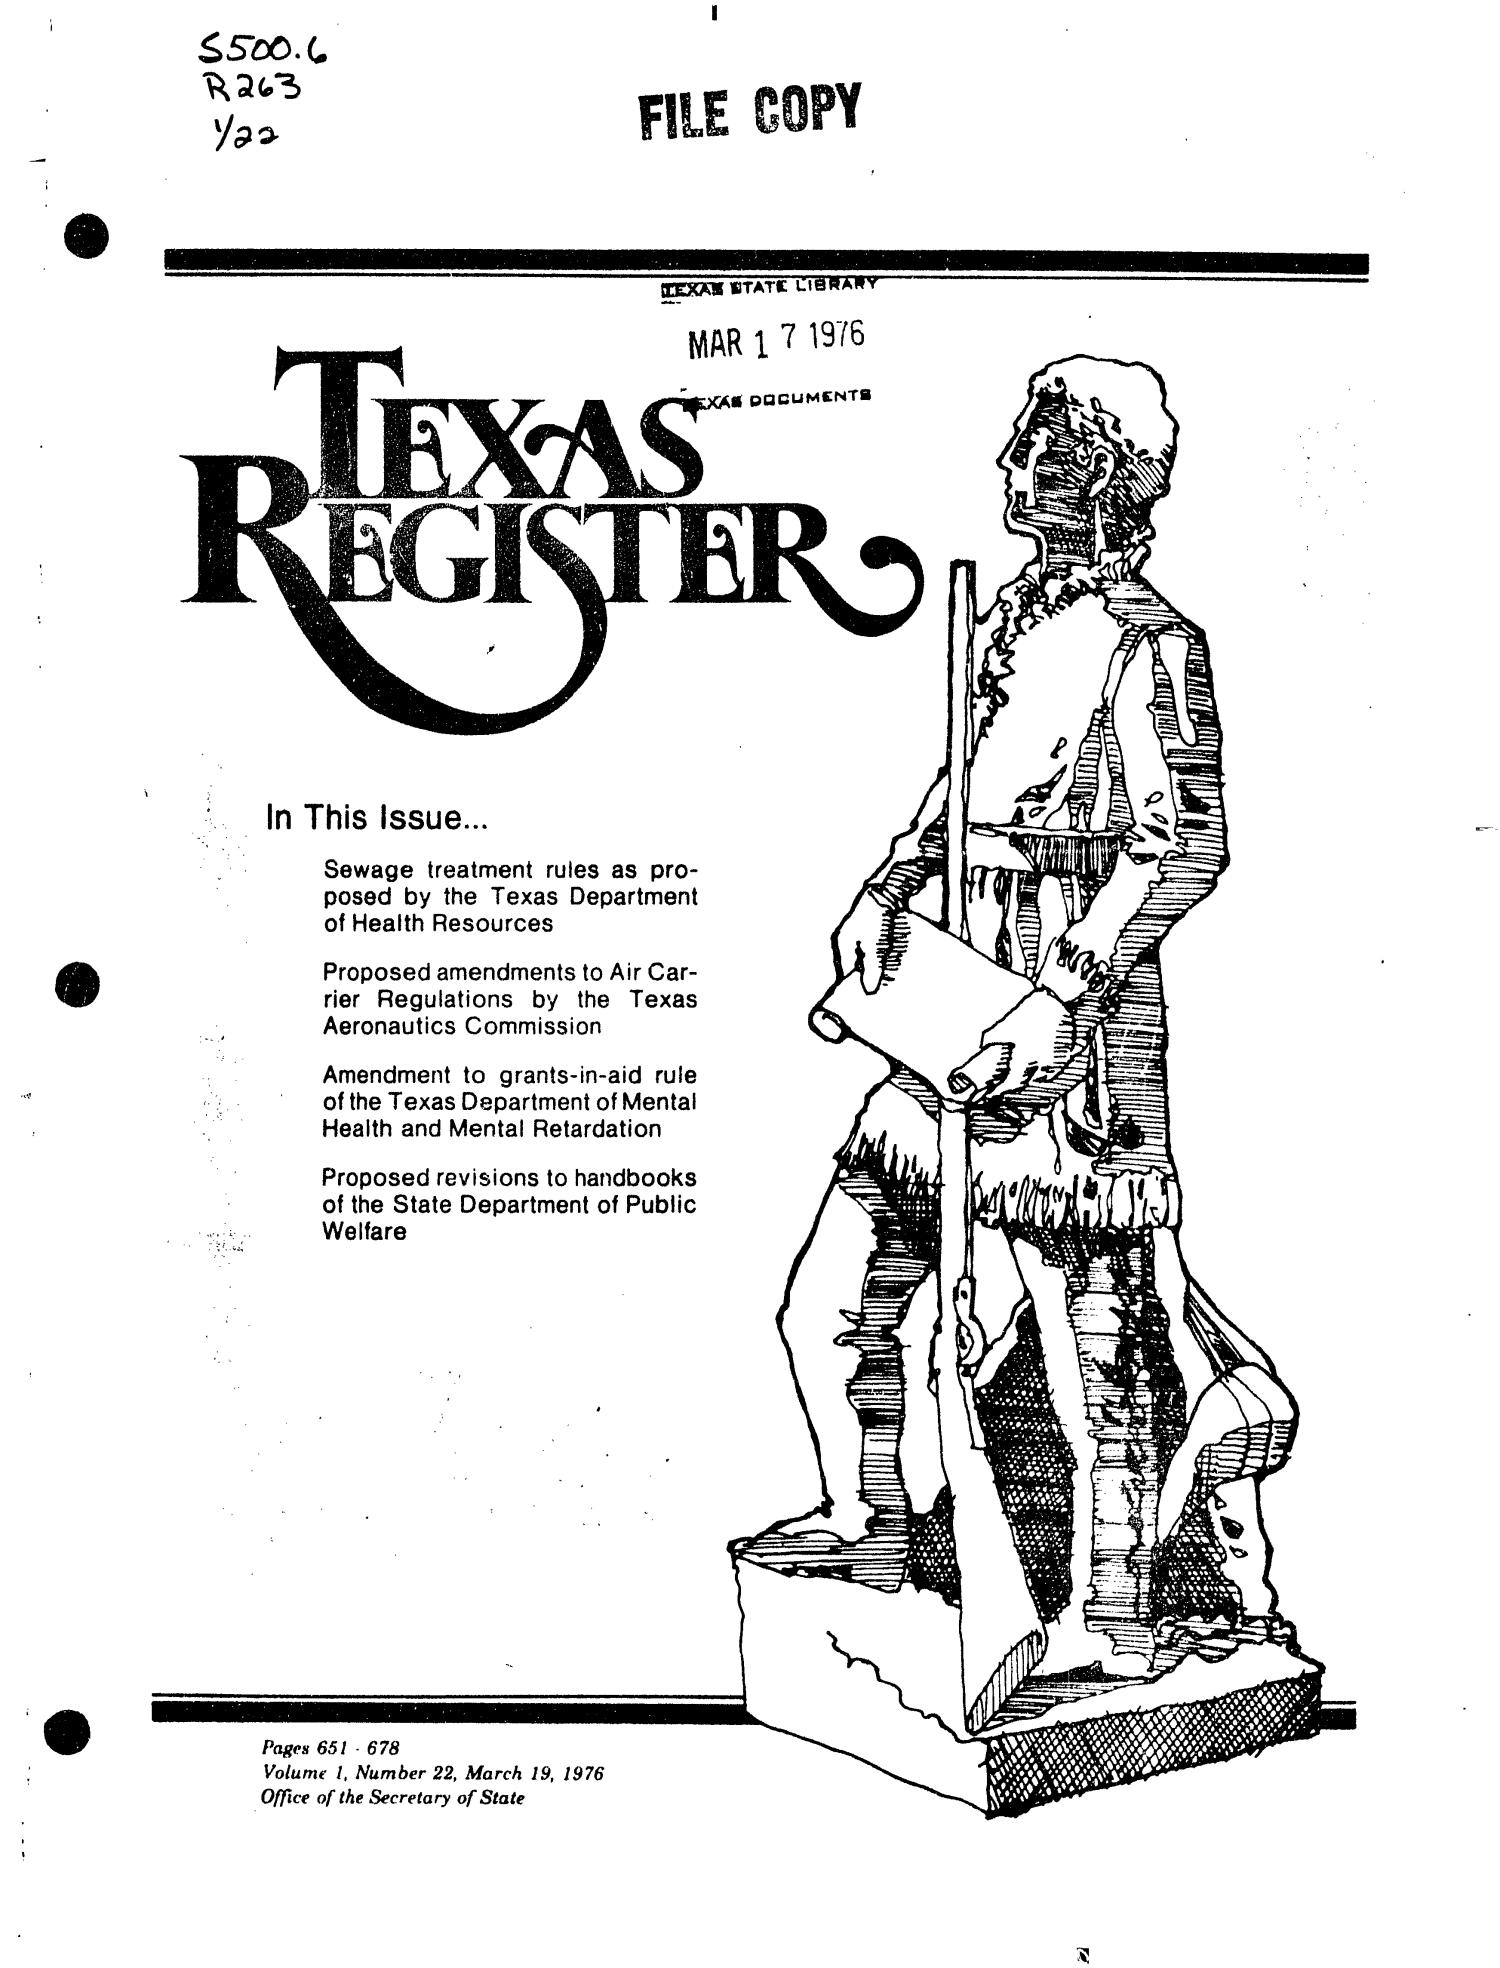 Texas Register, Volume 1, Number 22, Pages 651-678, March 19, 1976
                                                
                                                    Title Page
                                                